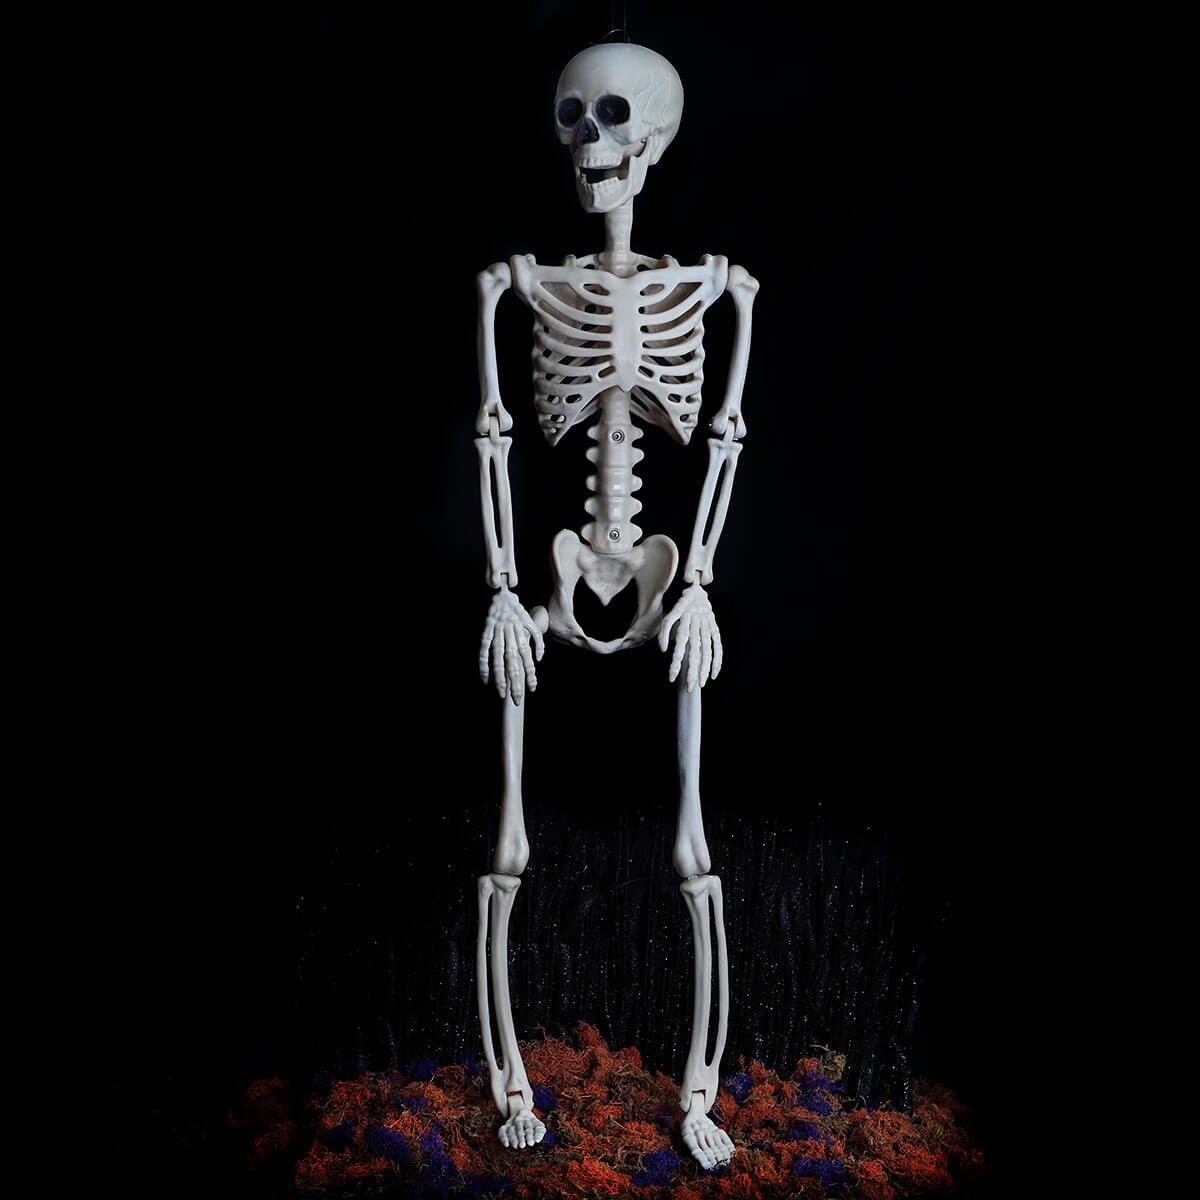 Glow In The Dark Posable Jointed Skeleton